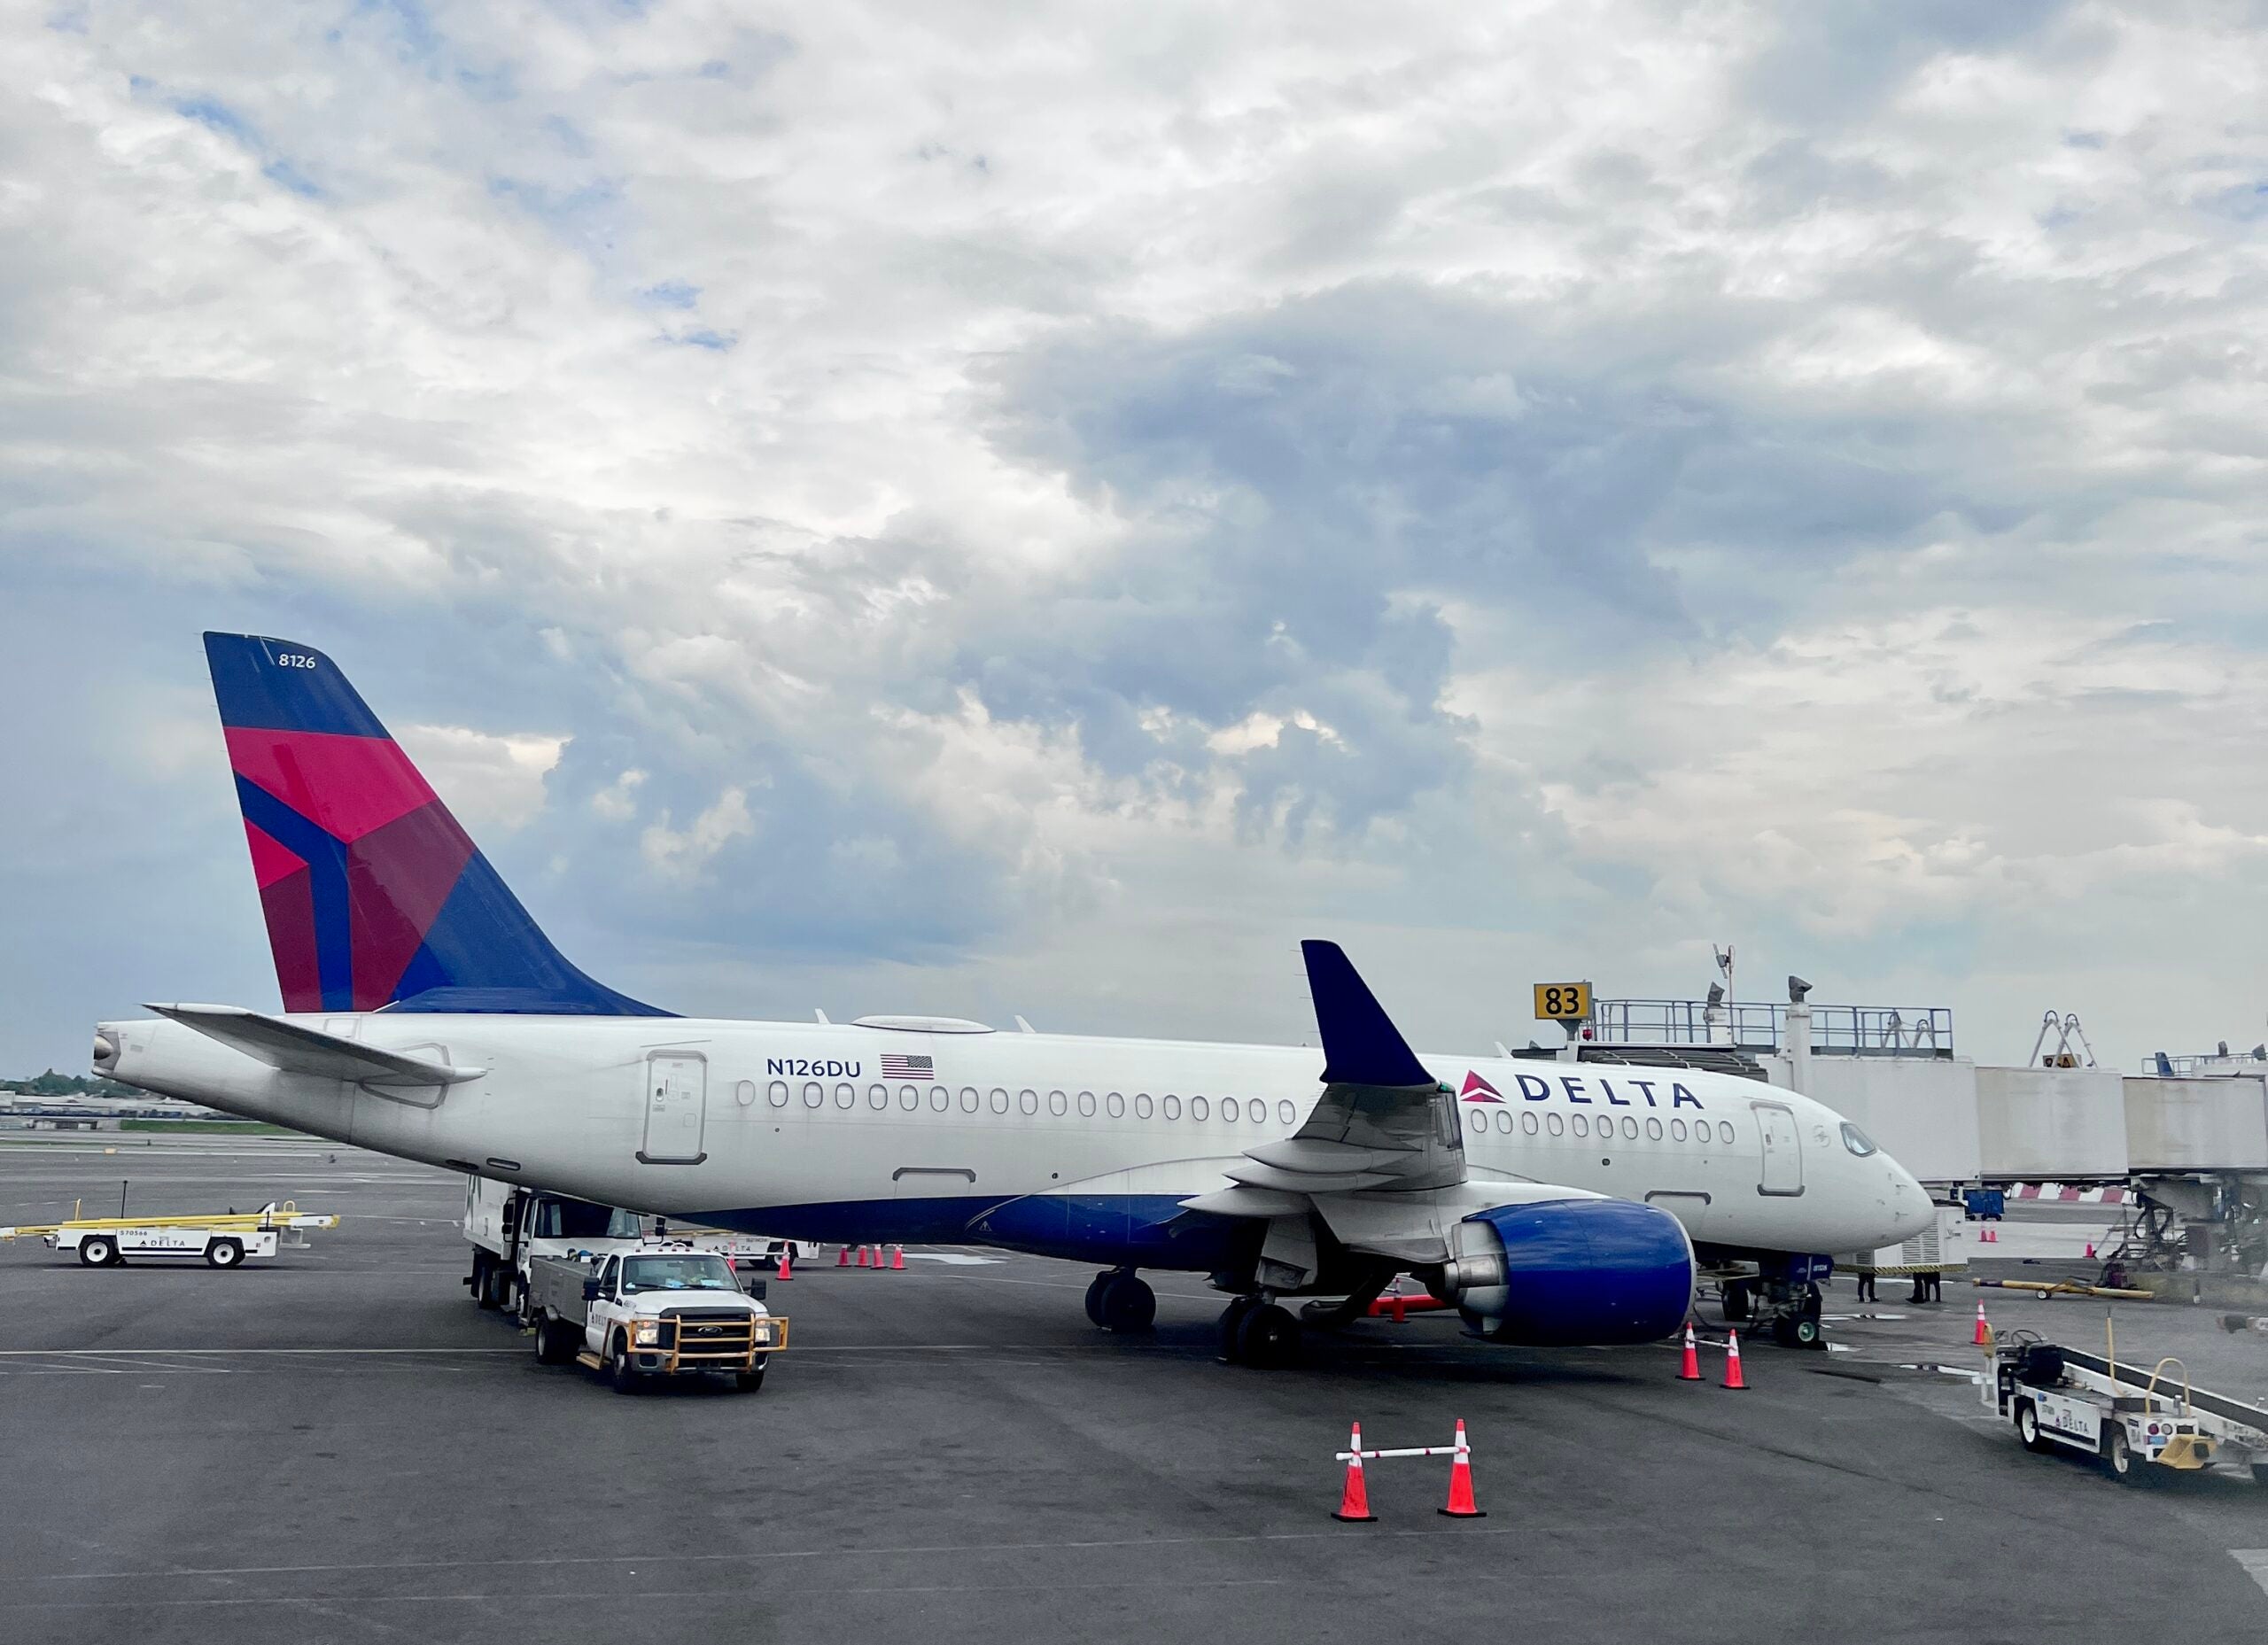 Delta Air Lines Airbus A220 at the New York gate